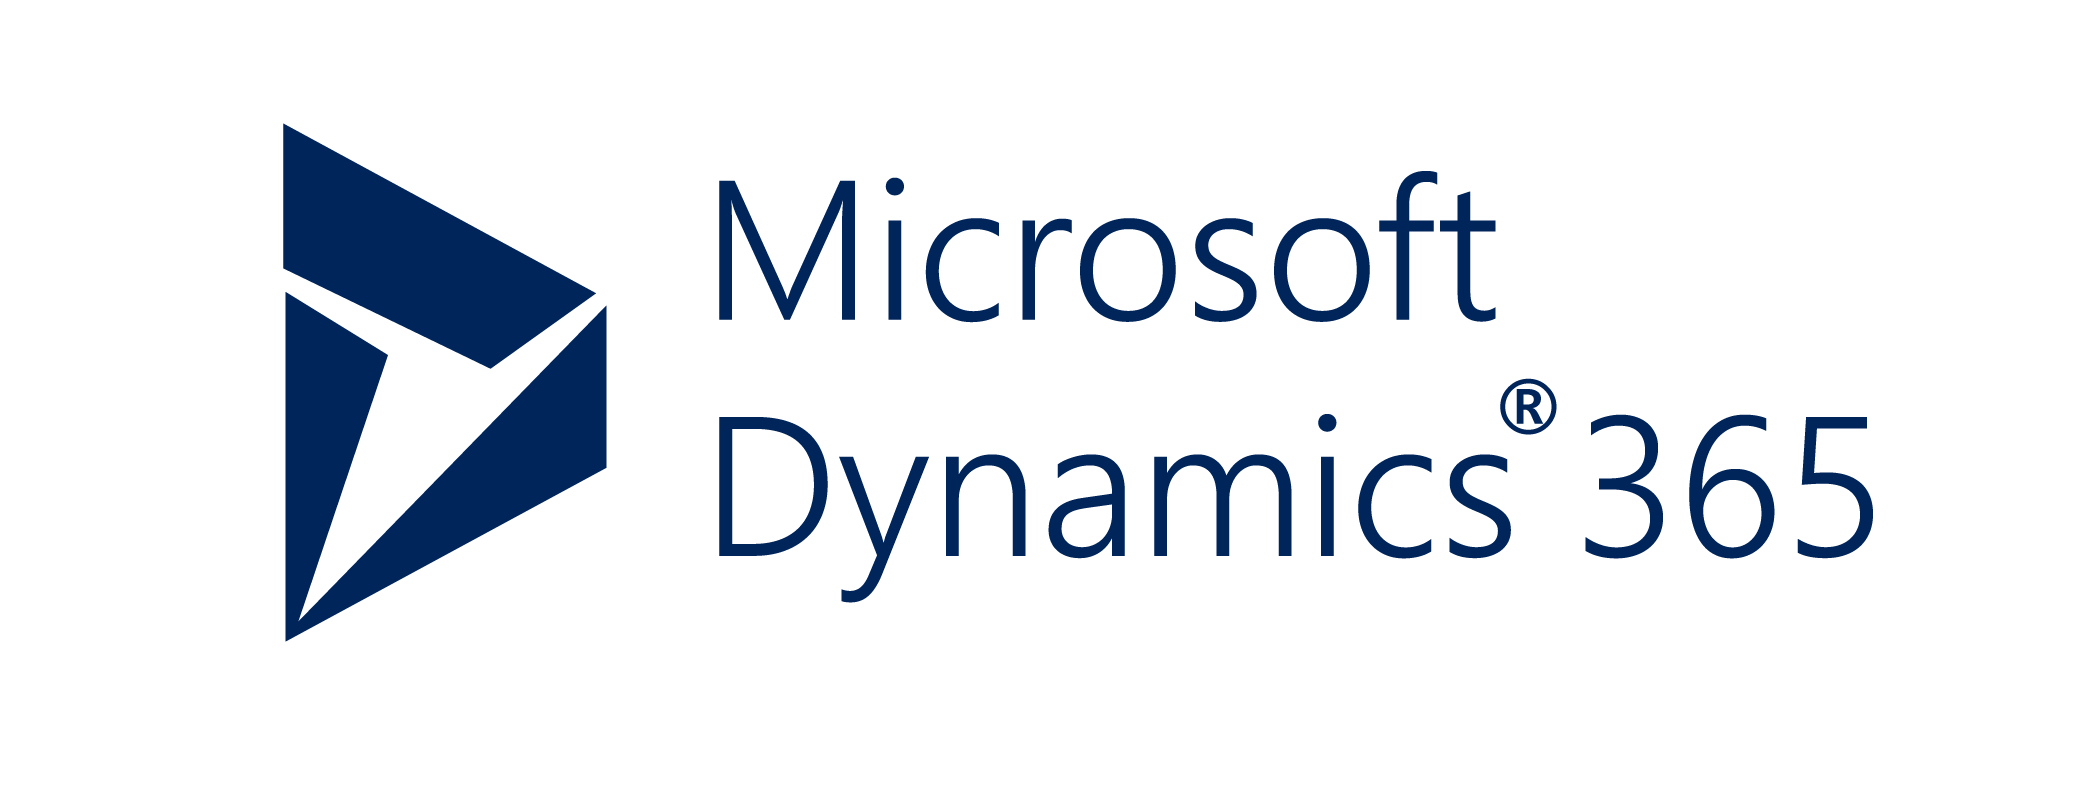 D365 Logo - How Dynamics 365 Cloud ERP Outperforms Traditional ERP system